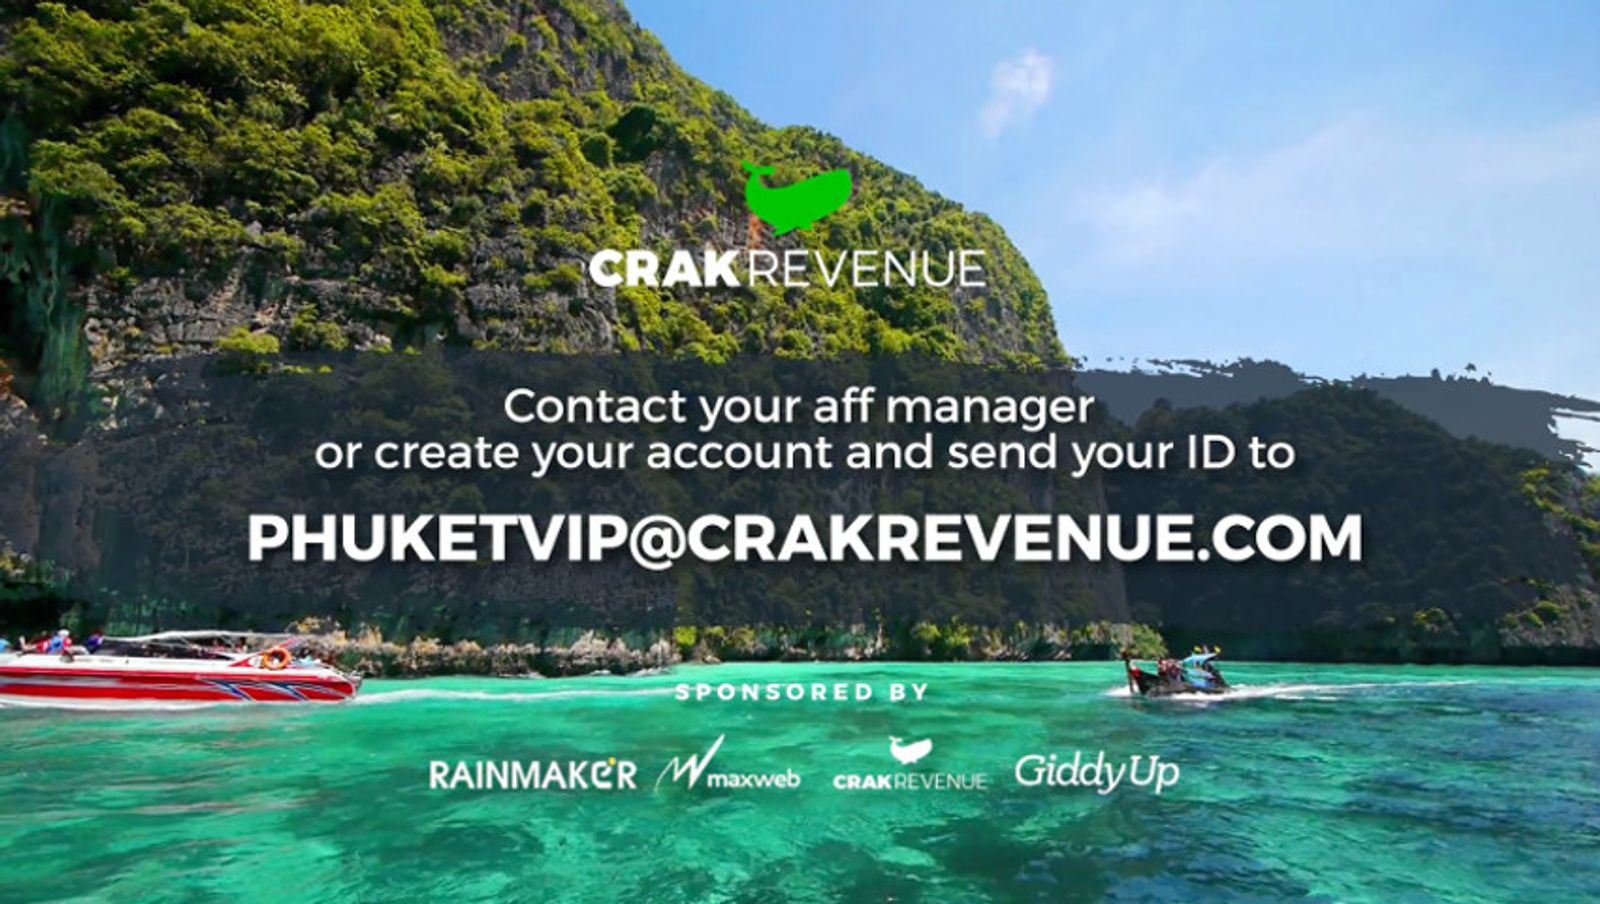 CrakRevenue Giving Away Passes for VIP Party in Thailand